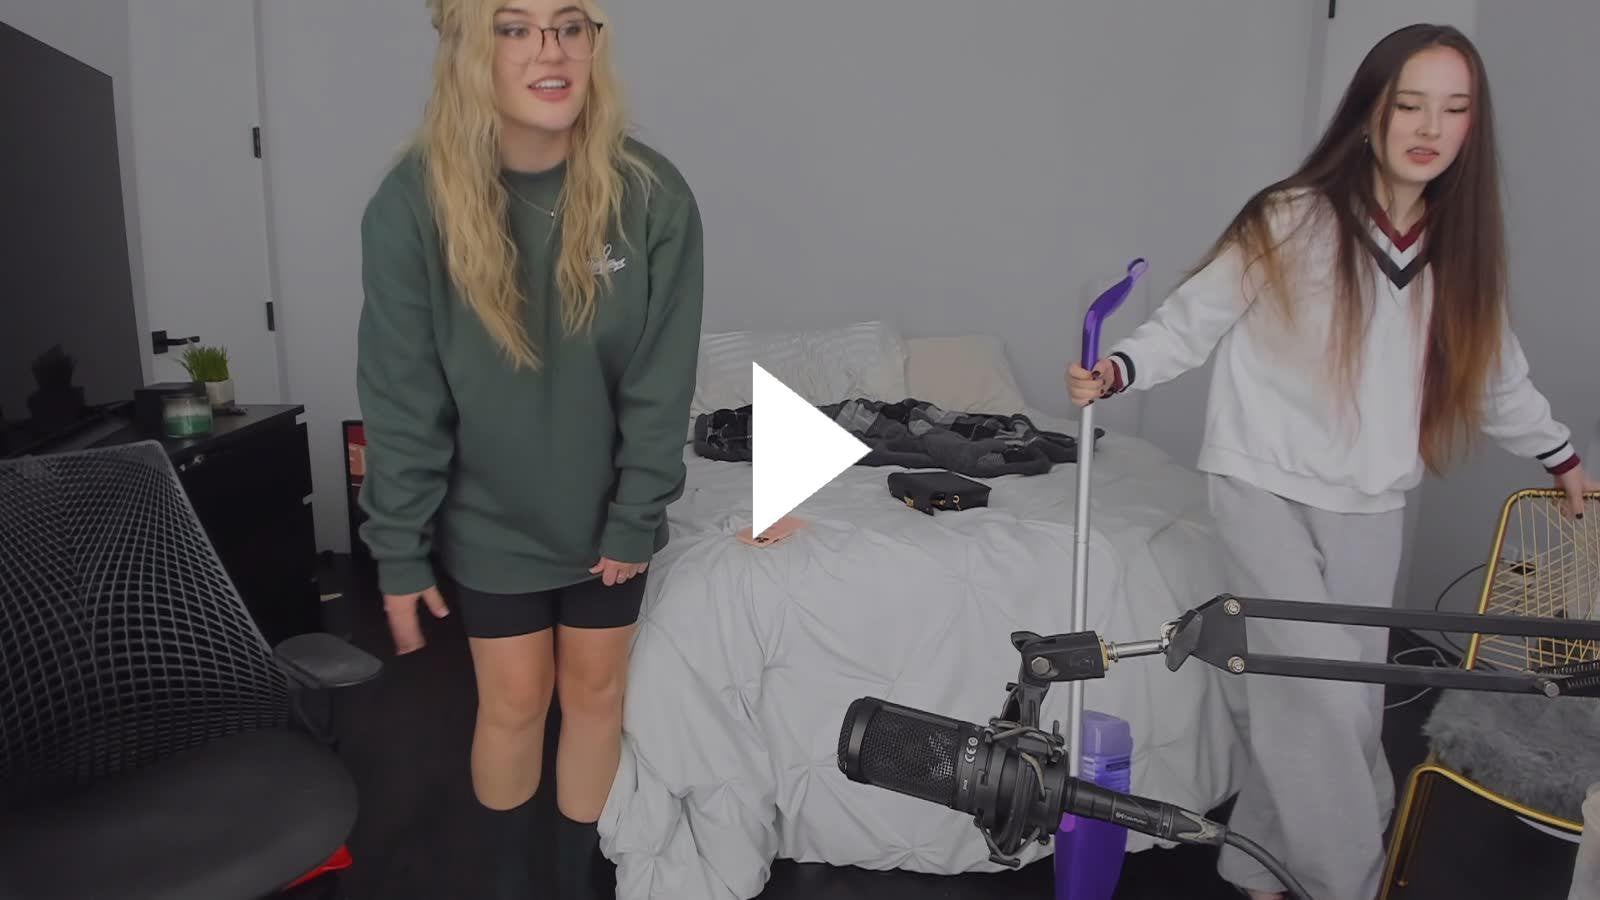 Brookeab accident prone rlivestreamfail